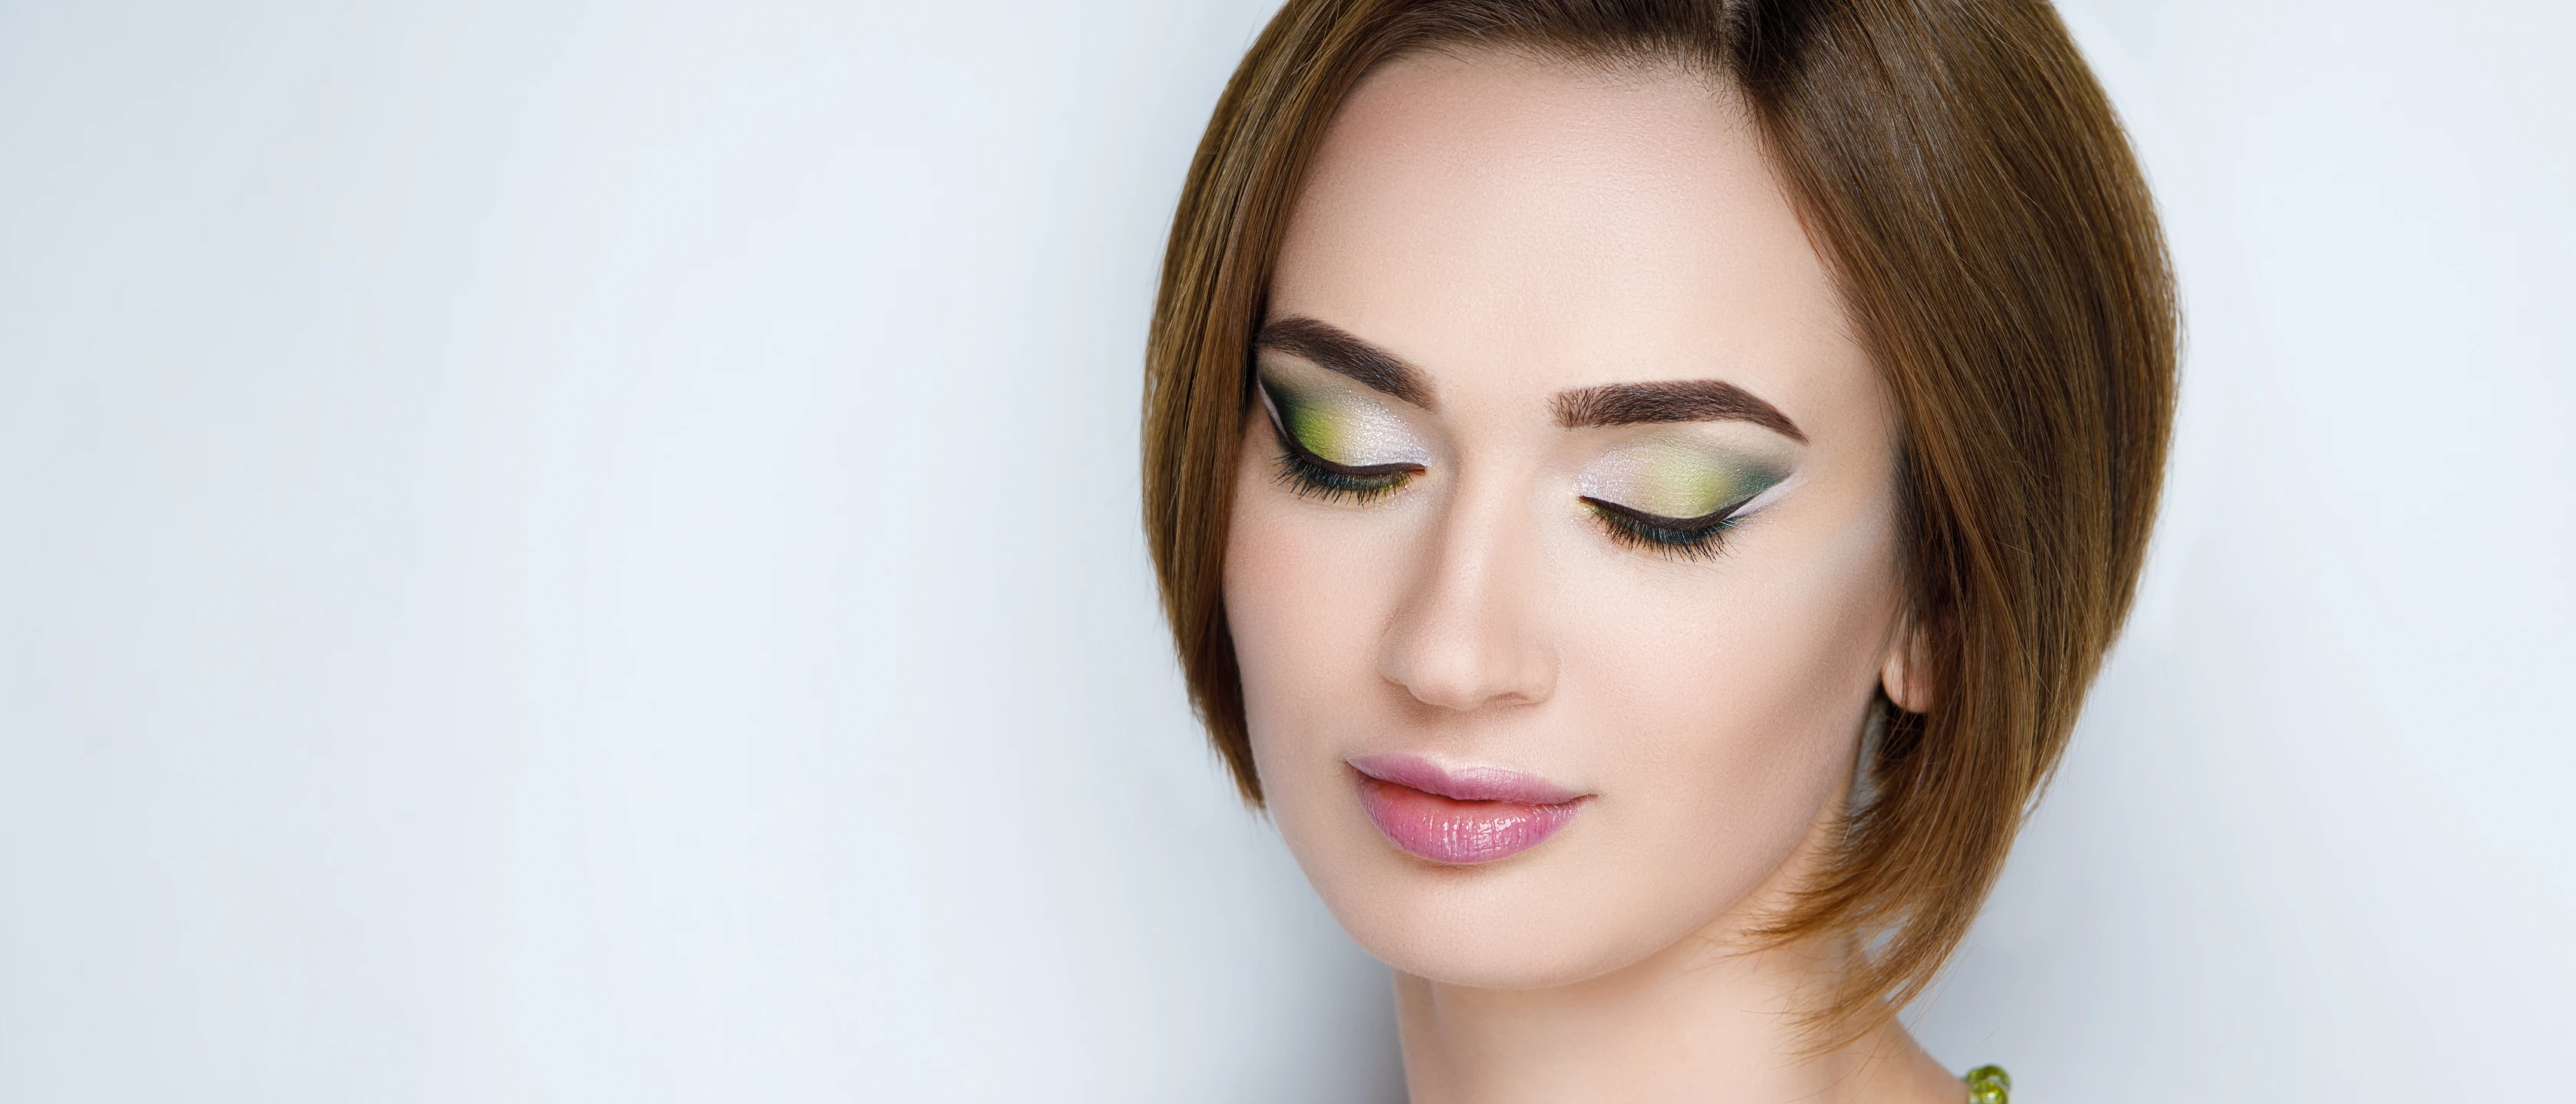 Close up of young woman's face with green and silver eyeshadow